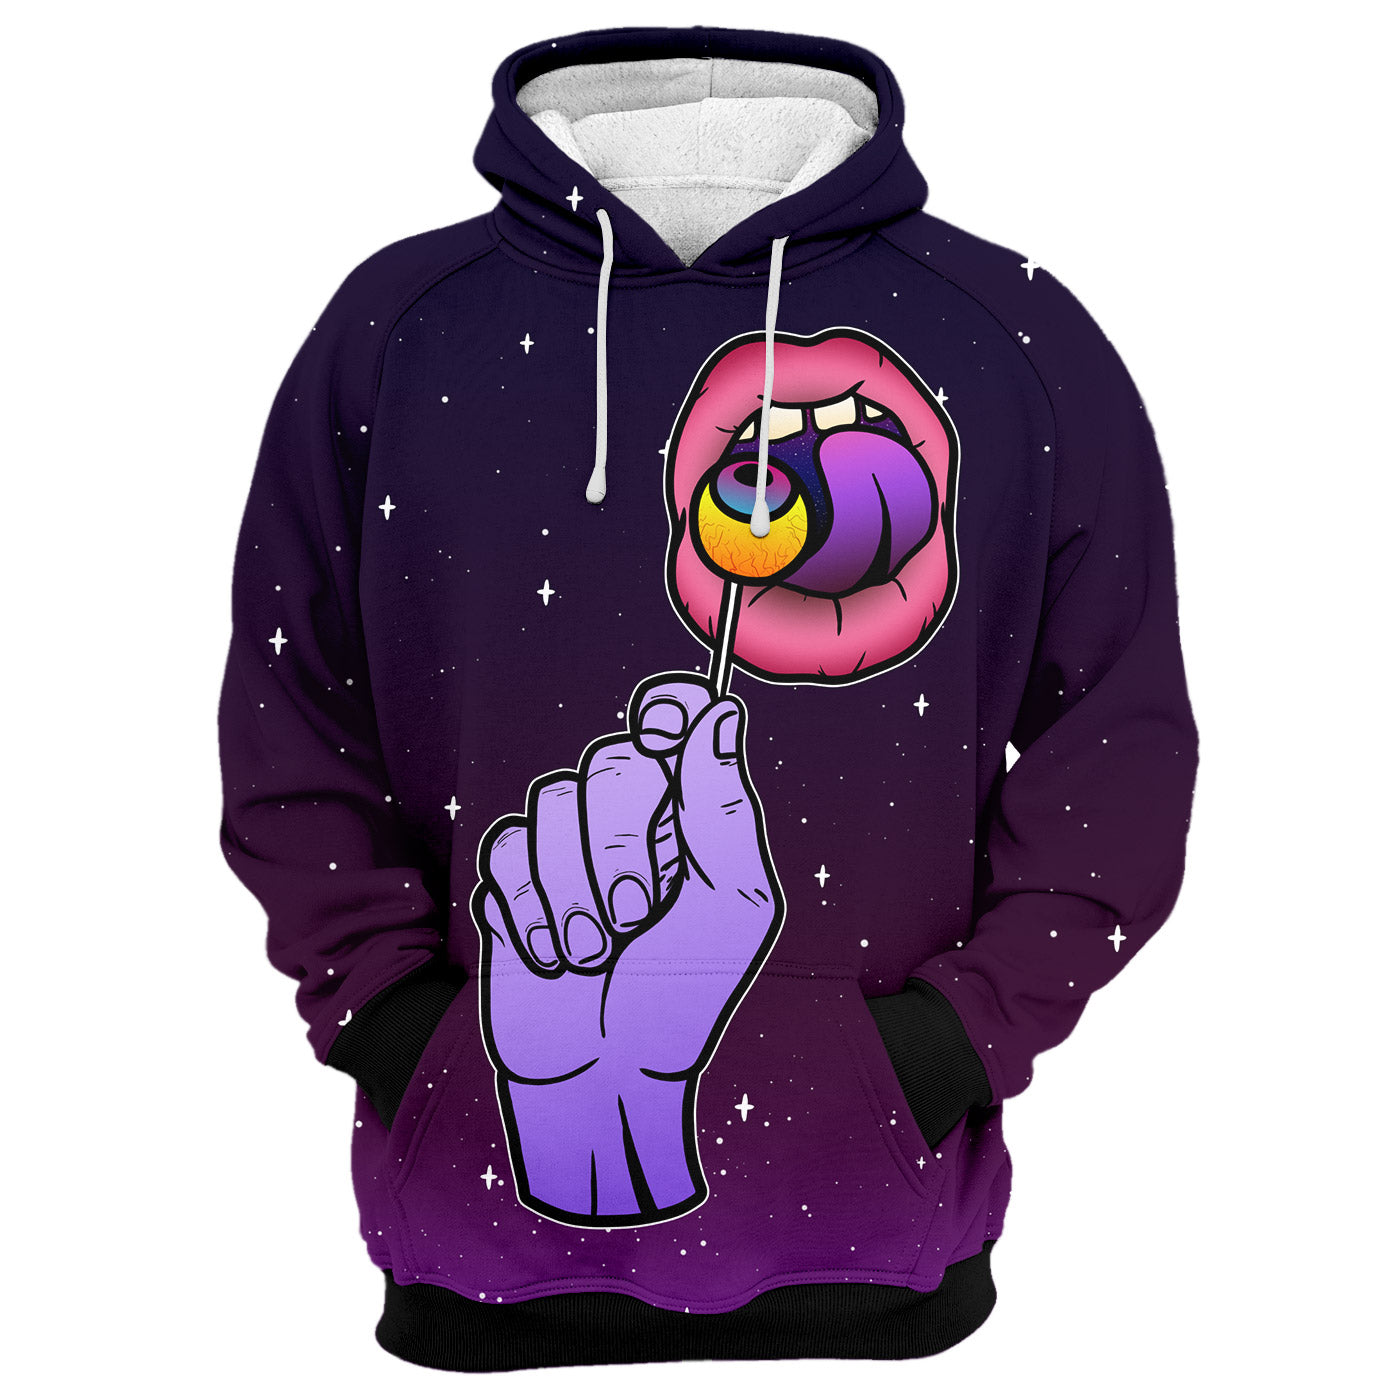 Lolly Poppin' Hoodie